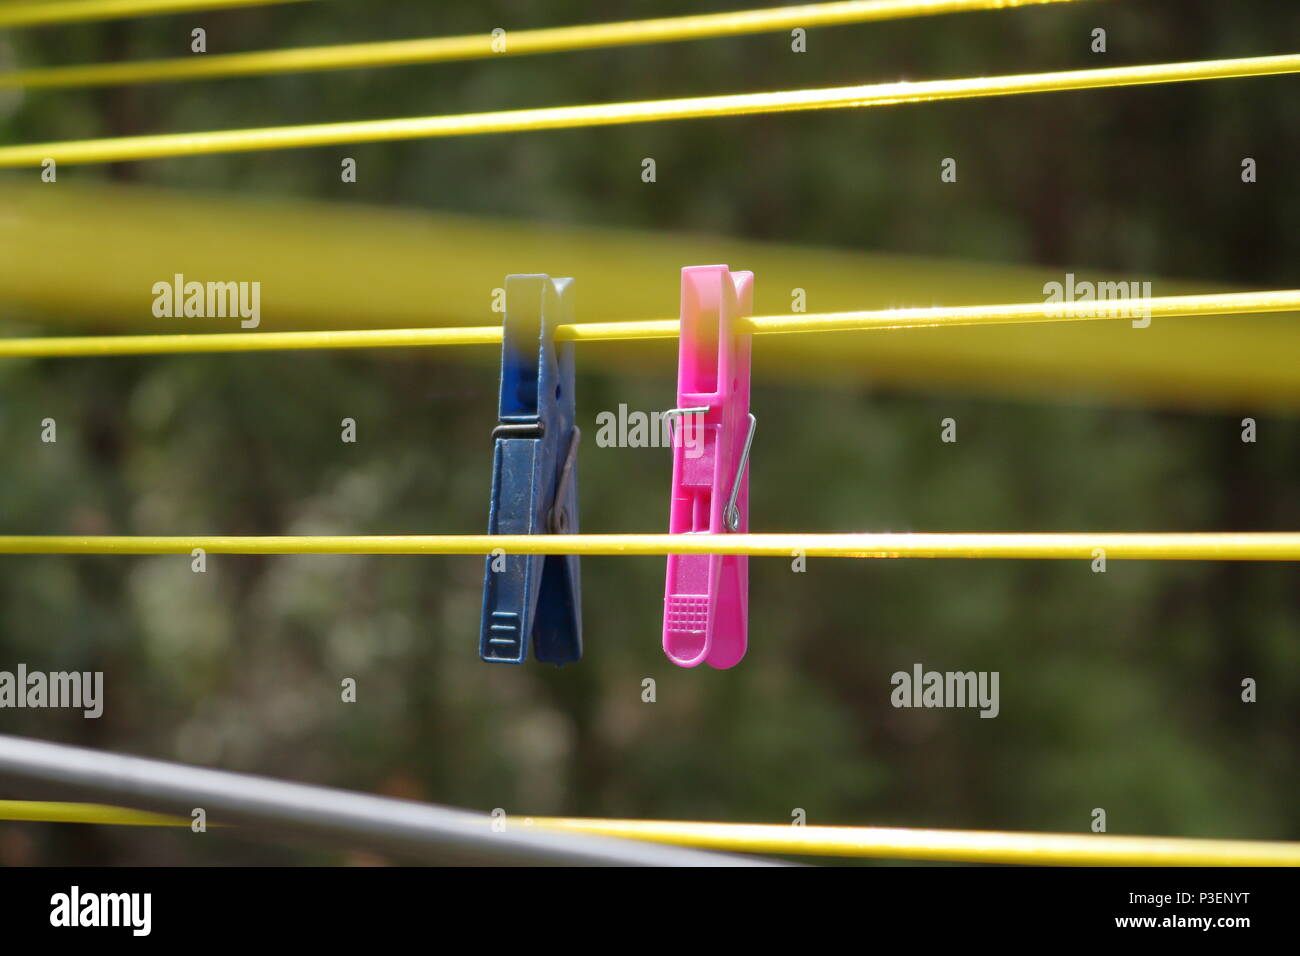 Blue and pink laundry pegs hung on a yellow washing line Stock Photo